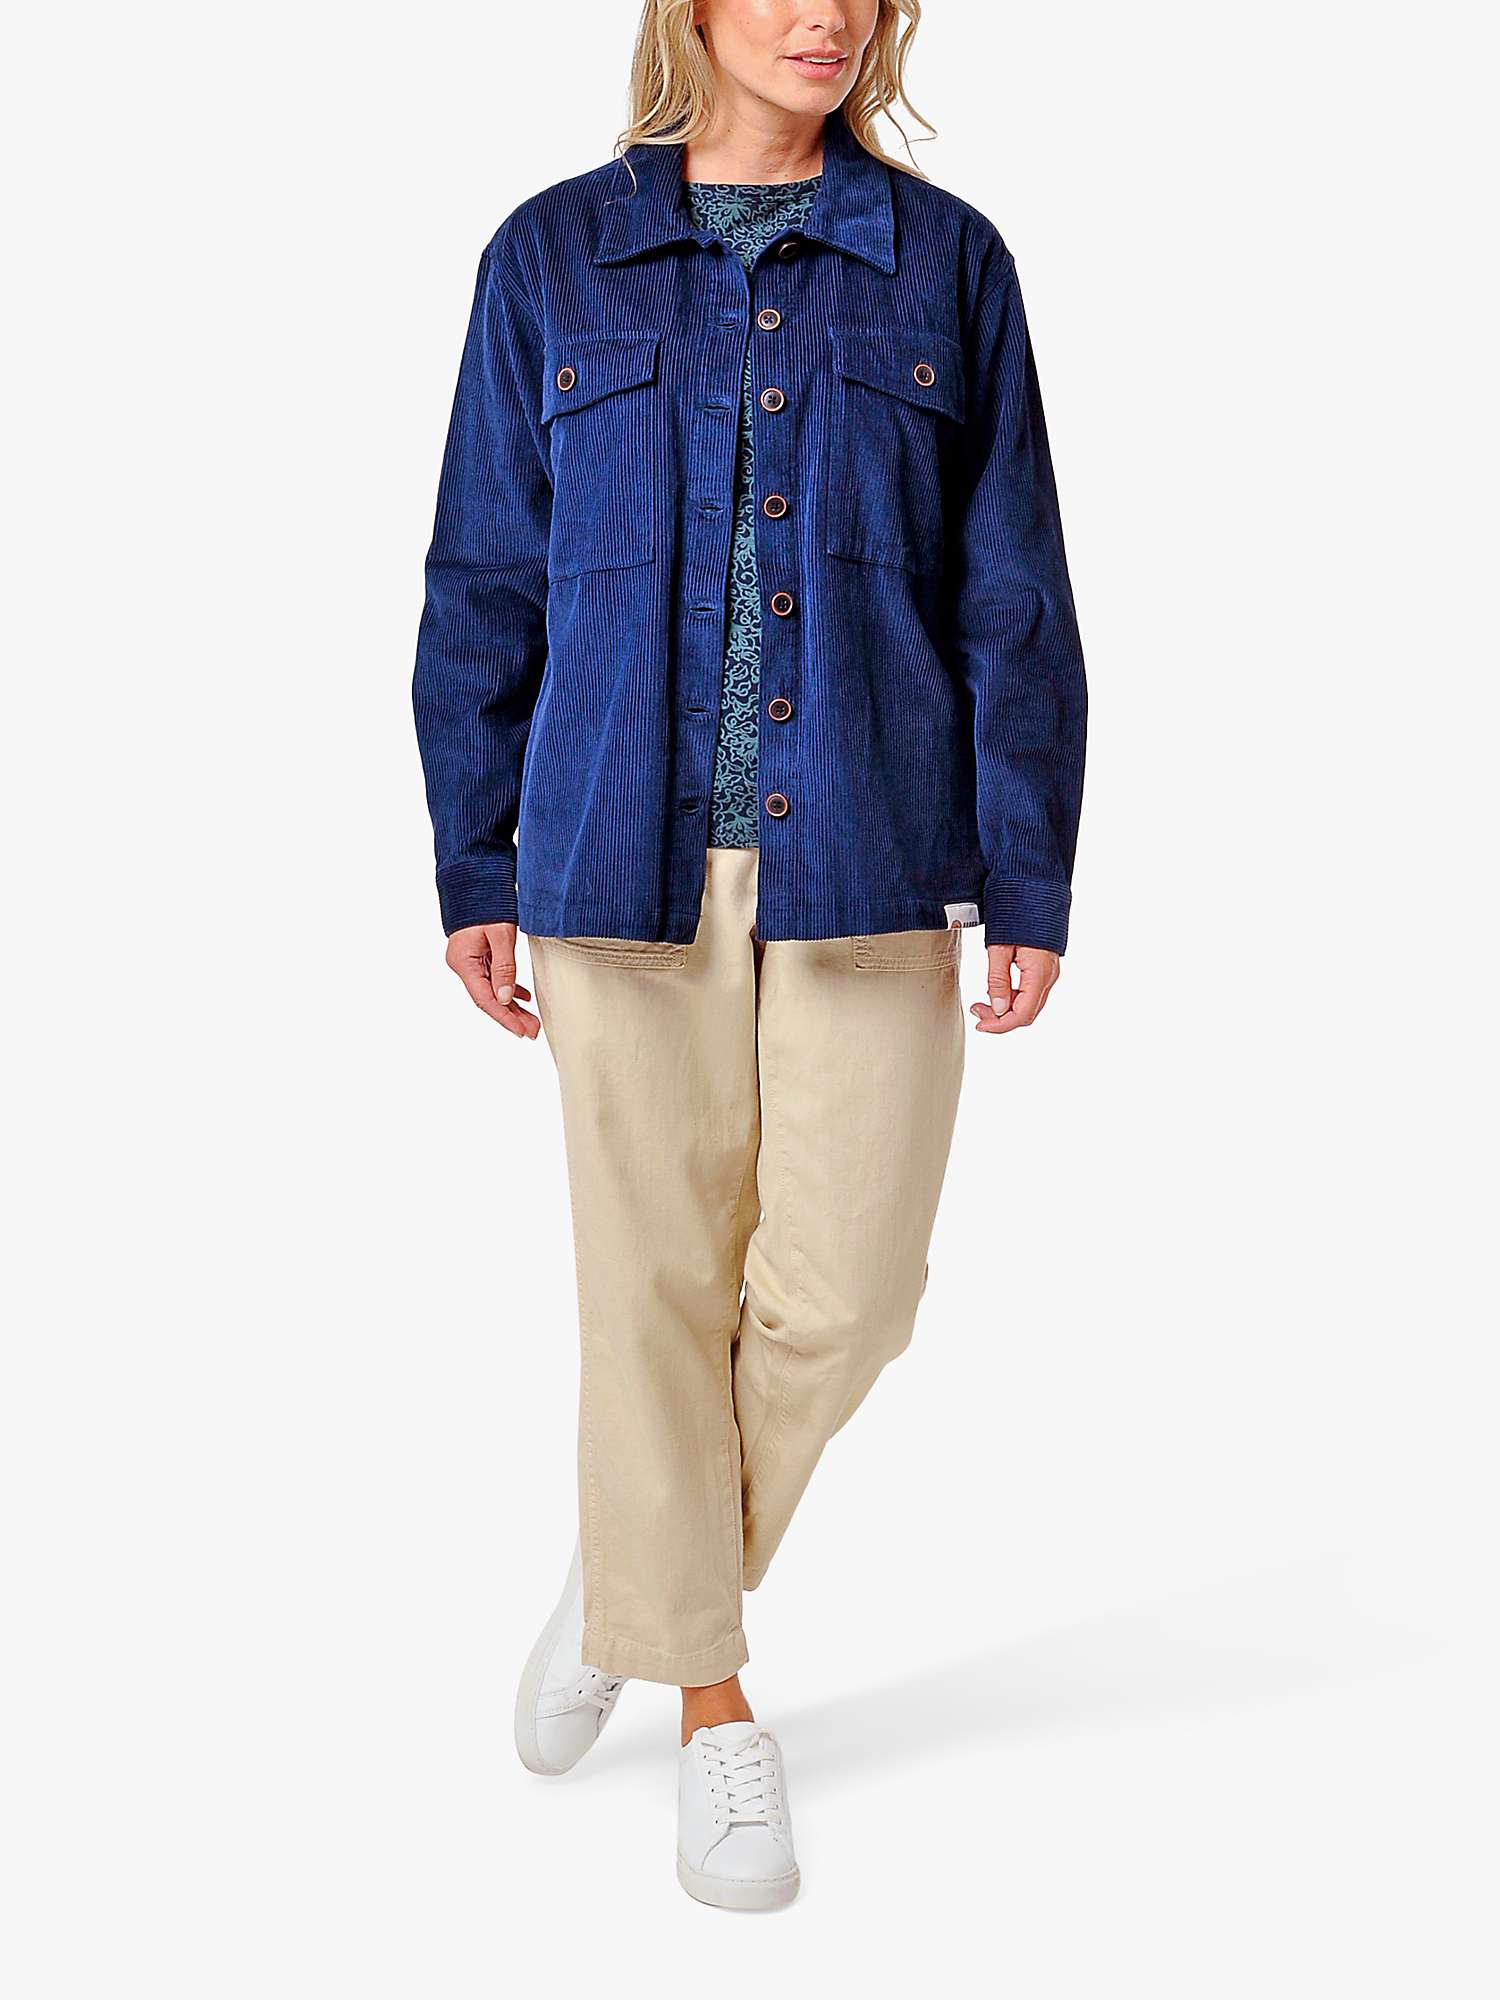 Buy Burgs Budleigh Overshirt Cotton Corduroy Jacket Online at johnlewis.com